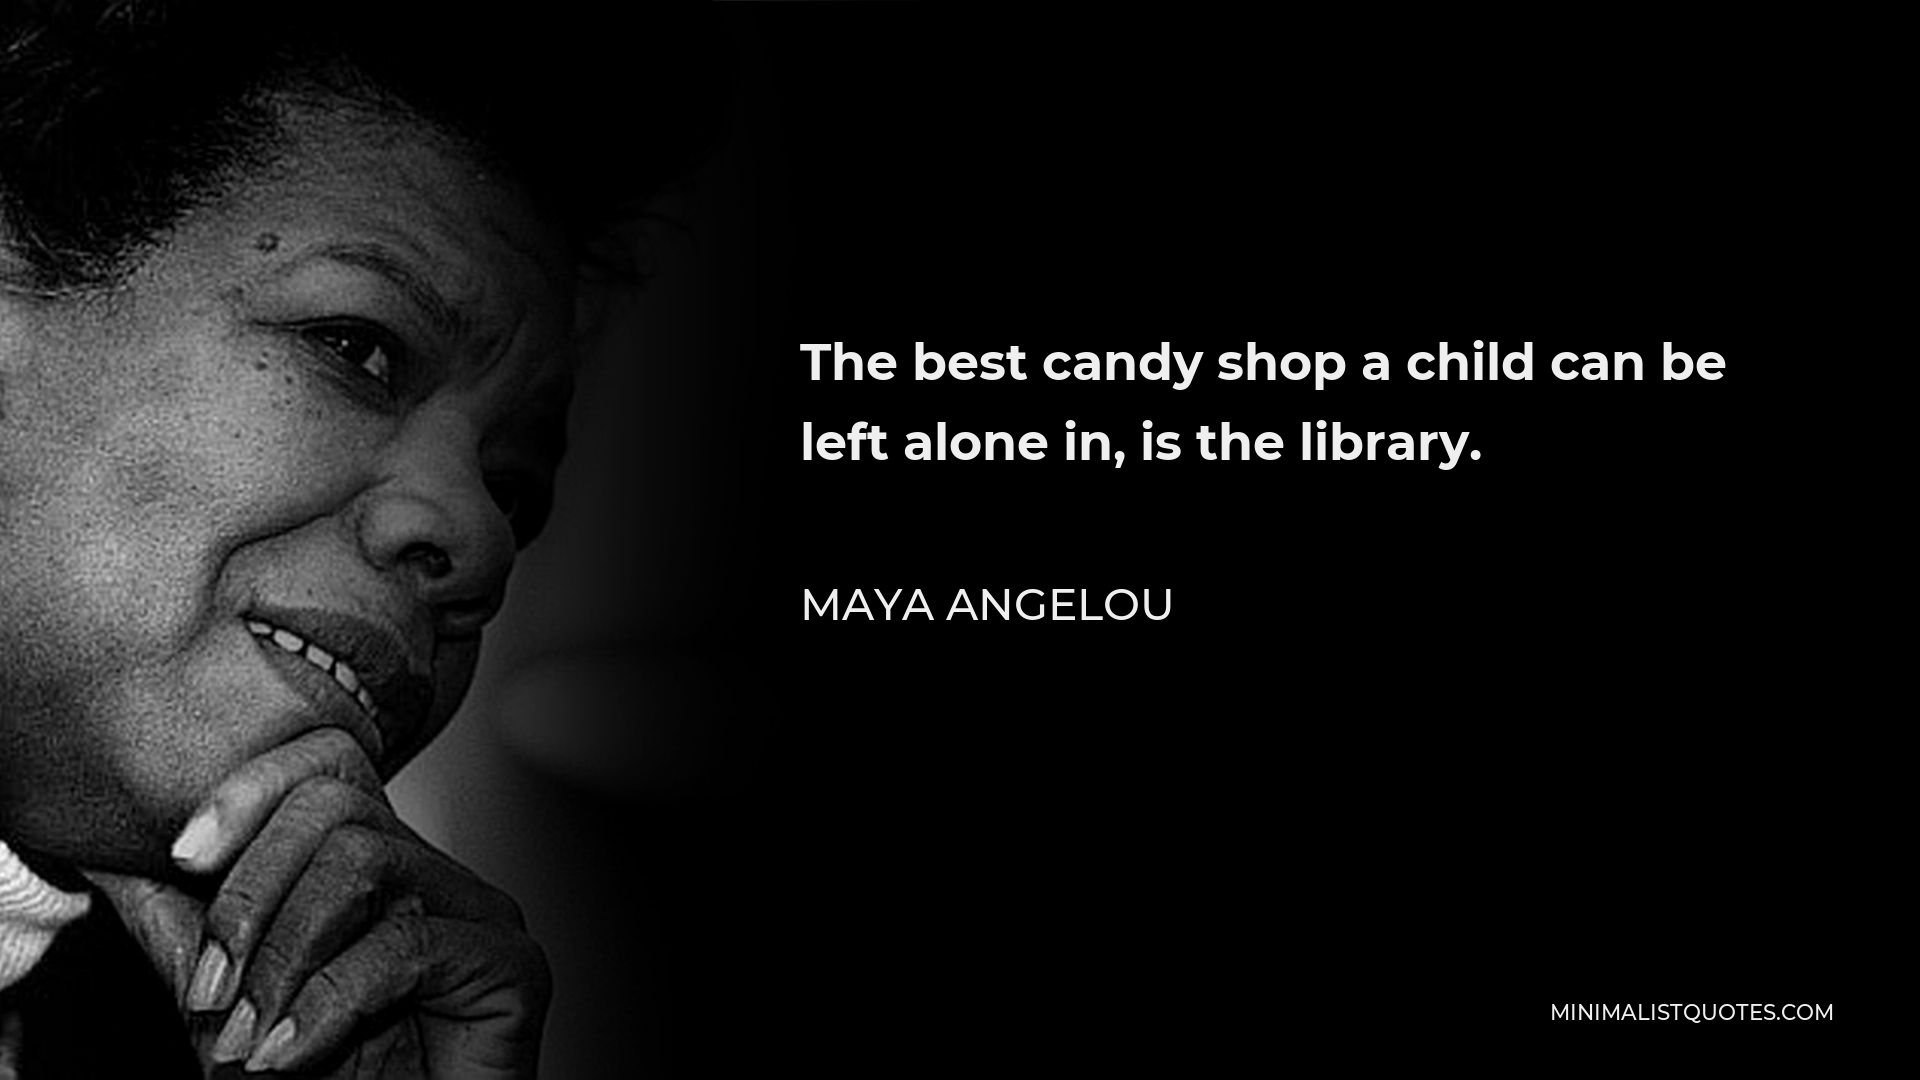 Maya Angelou Quote - The best candy shop a child can be left alone in, is the library.